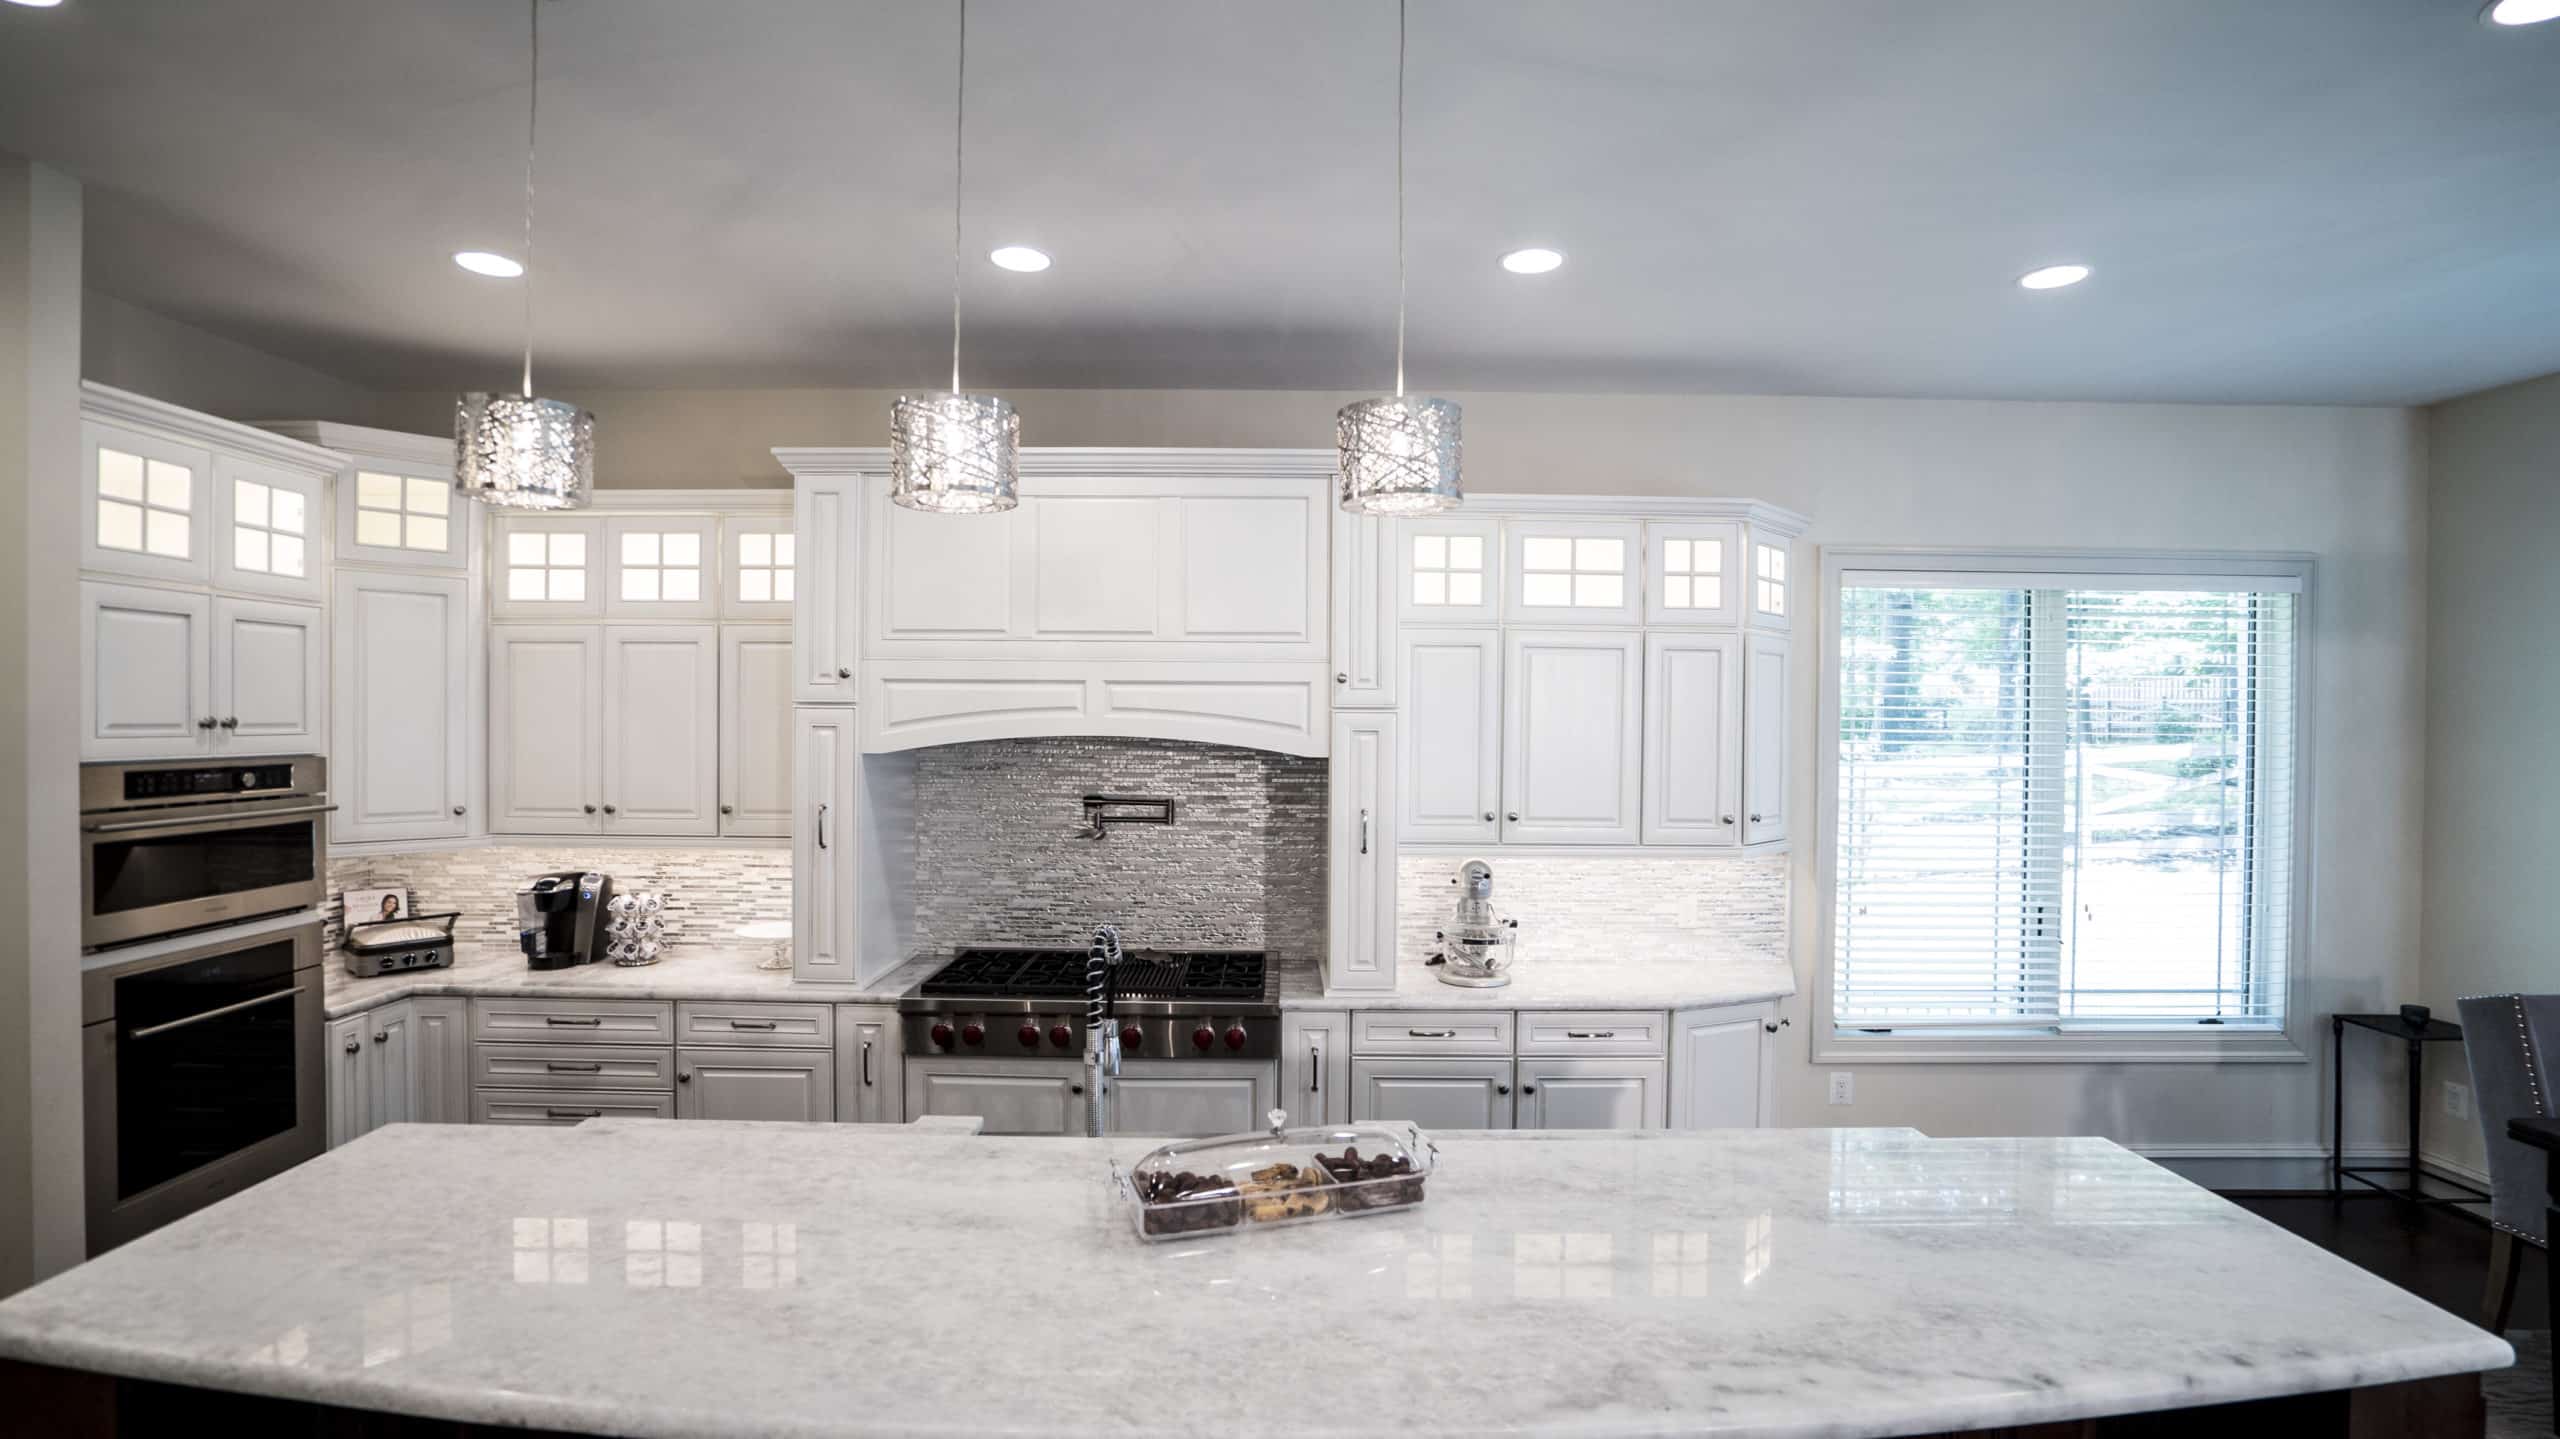 A kitchen with white cabinets and marble countertops